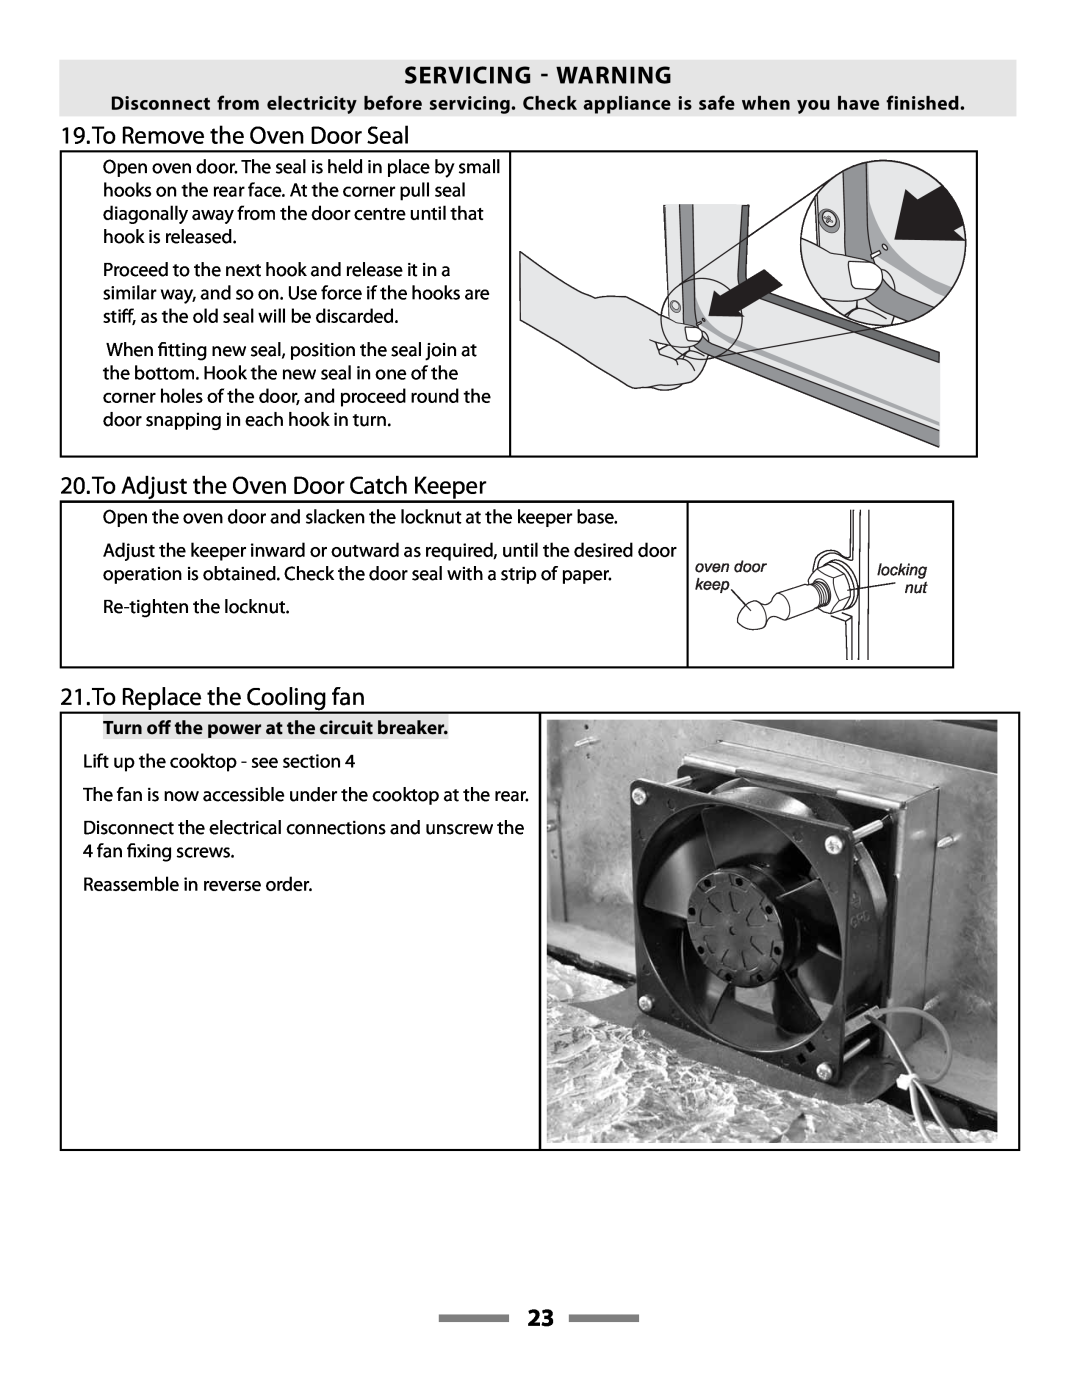 Aga Ranges F107411-01 manual To Remove the Oven Door Seal, To Adjust the Oven Door Catch Keeper, To Replace the Cooling fan 